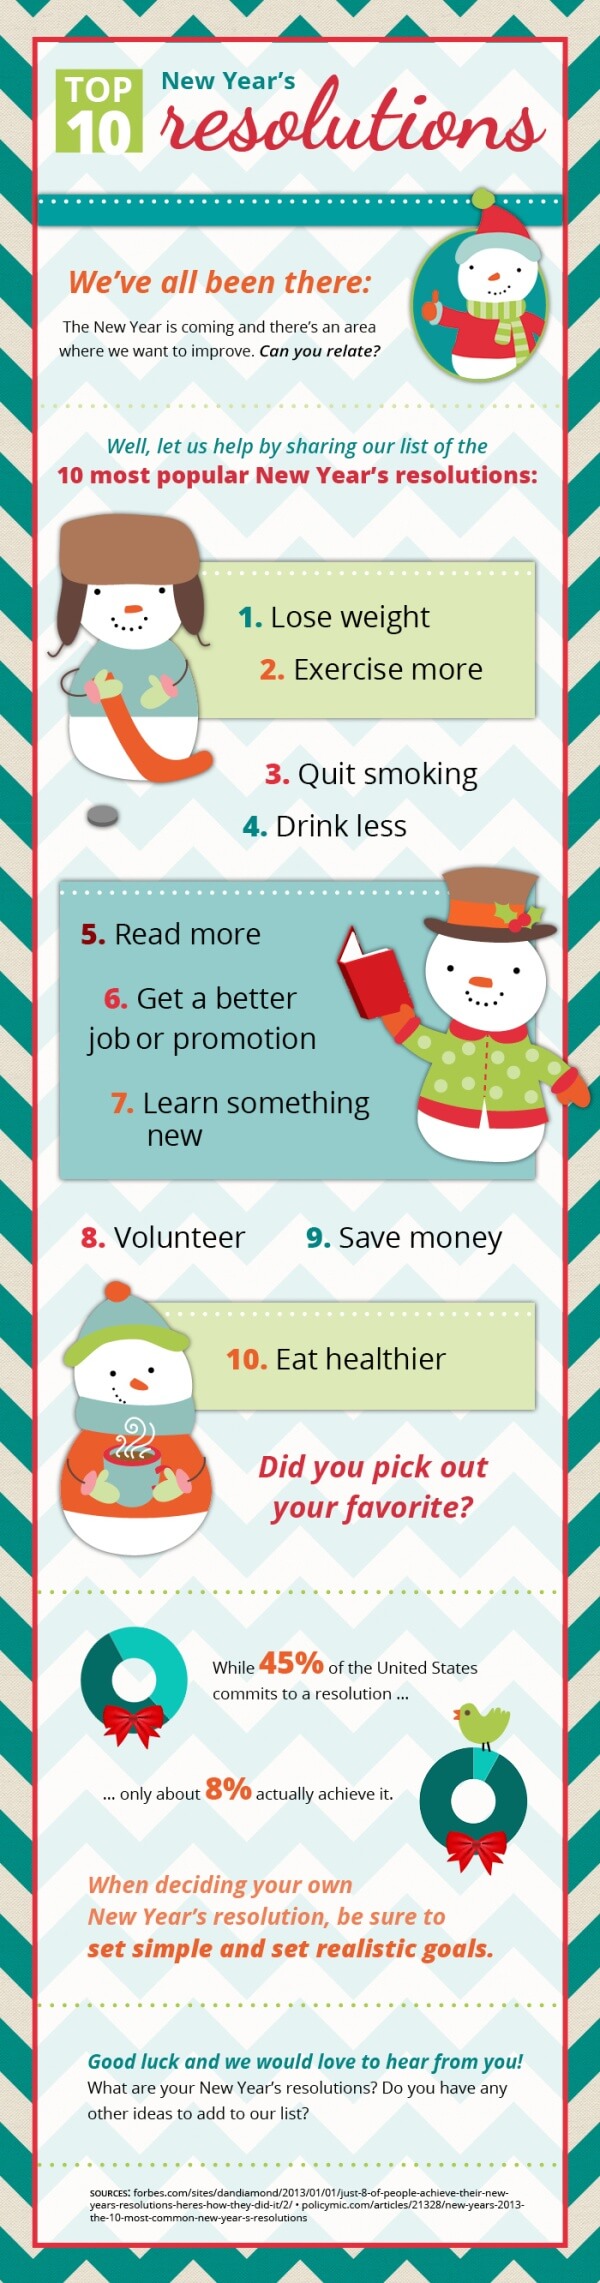 infographic on the top 10 New Year's resolutions